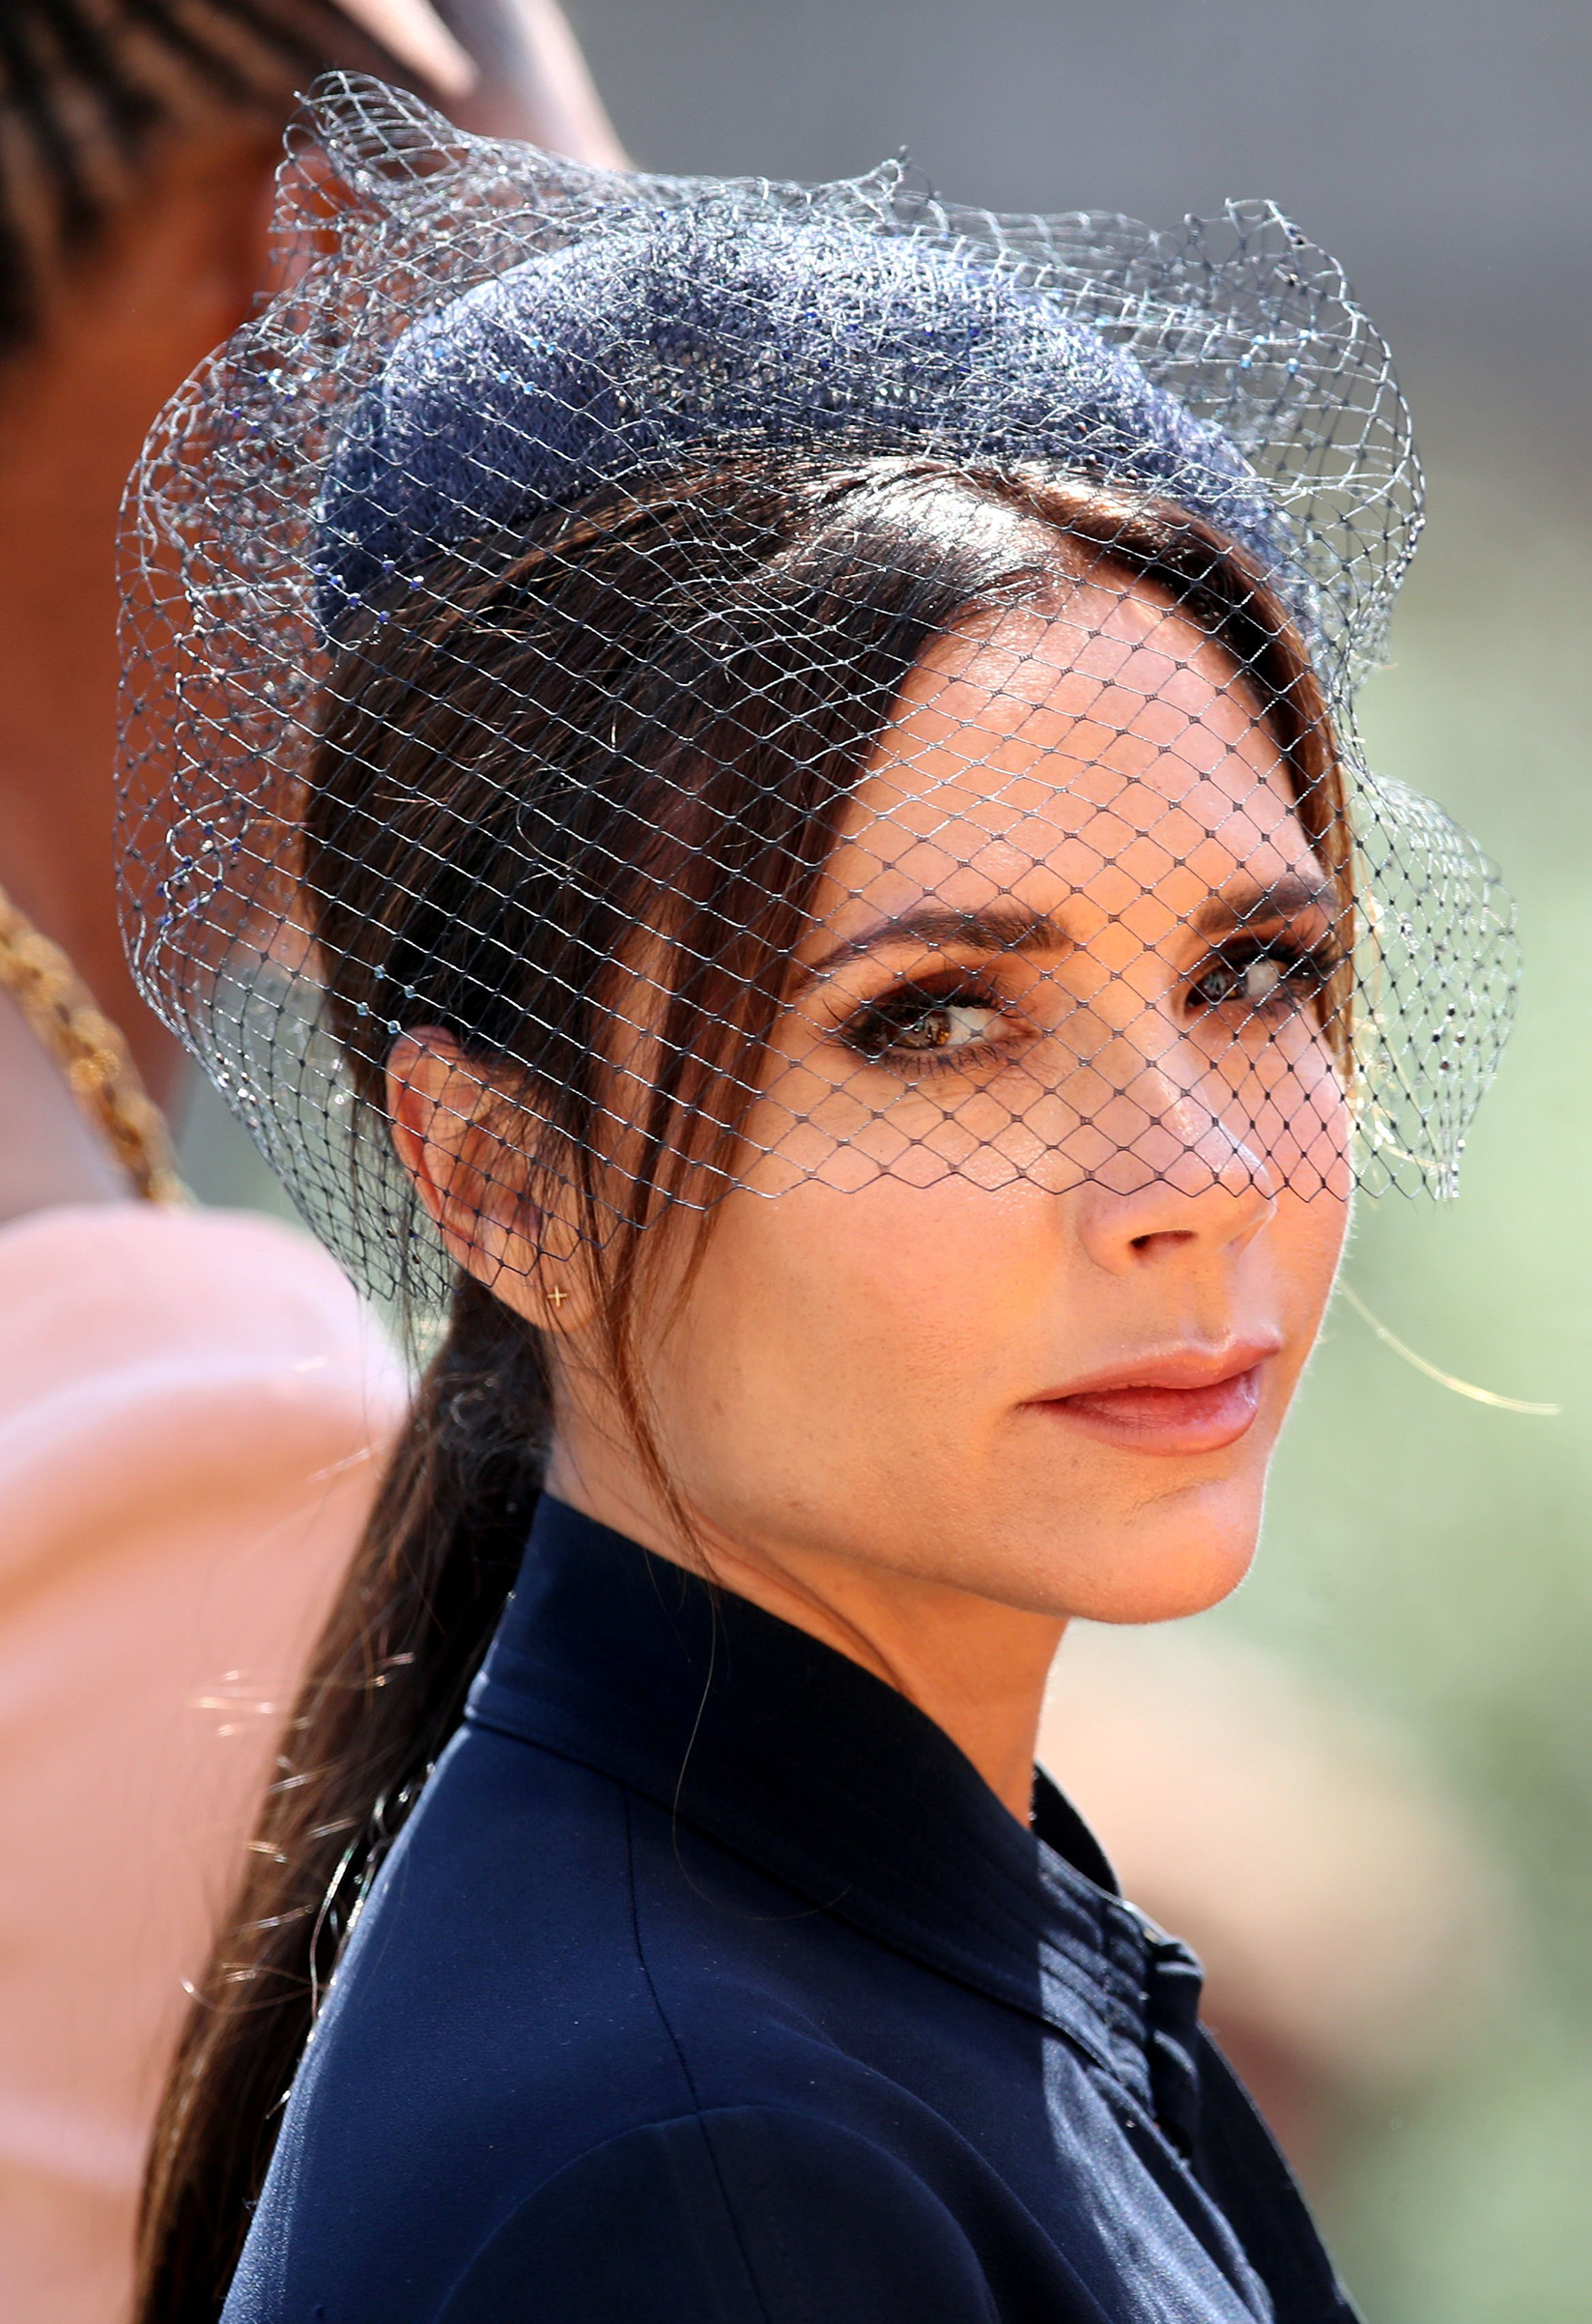 Victoria Beckham leaves St George's Chapel at Windsor Castle after the wedding of Meghan Markle and Prince Harry, May 19, 2018.